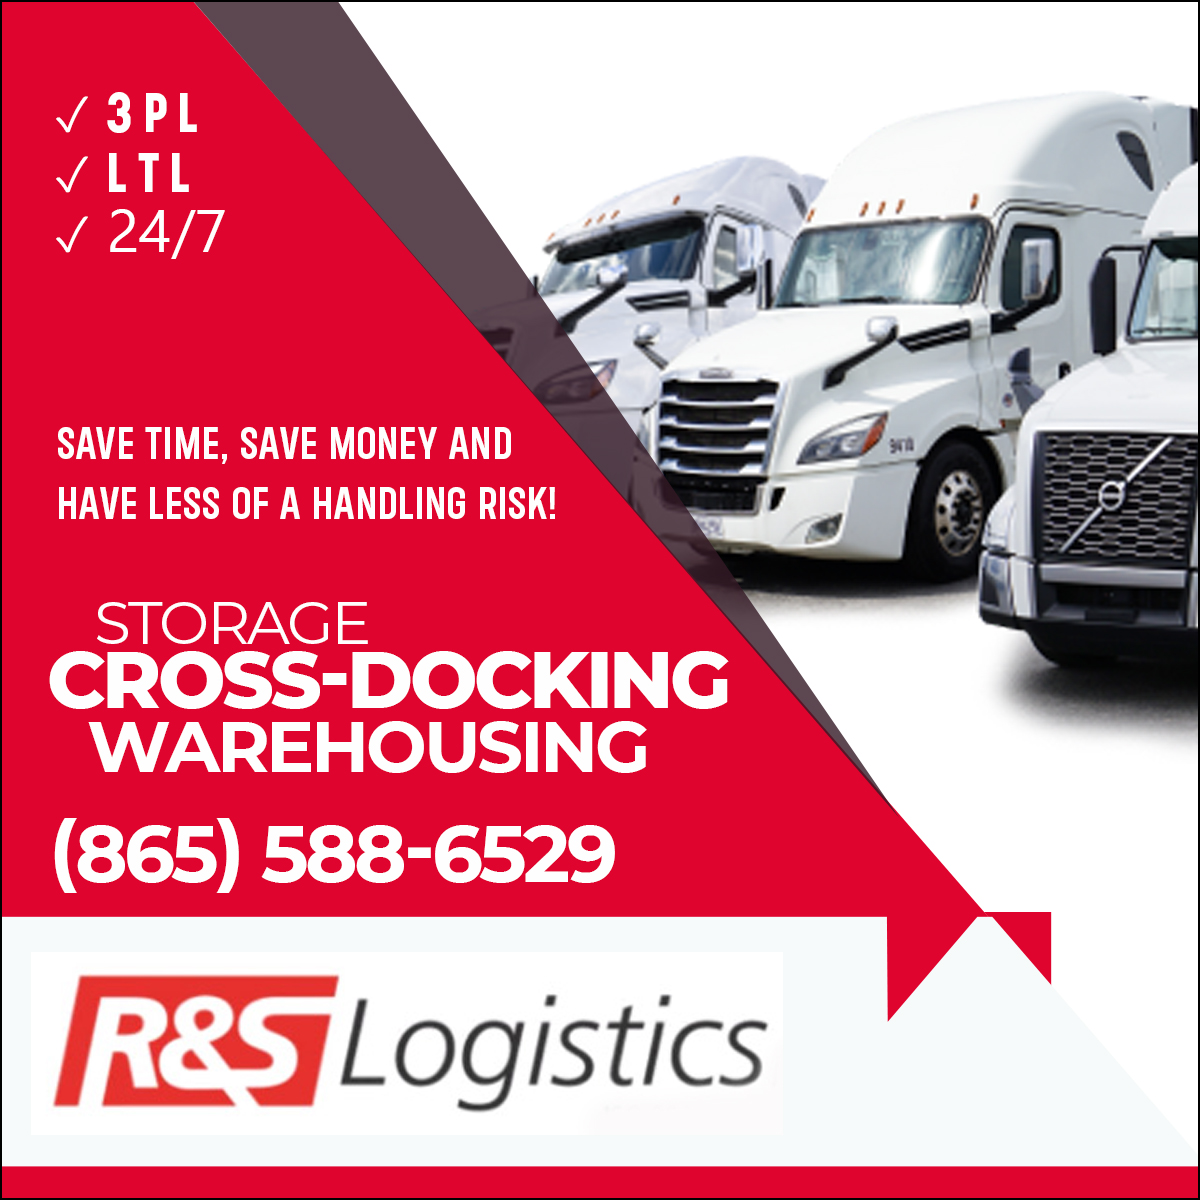 R&S Warehousing Solutions